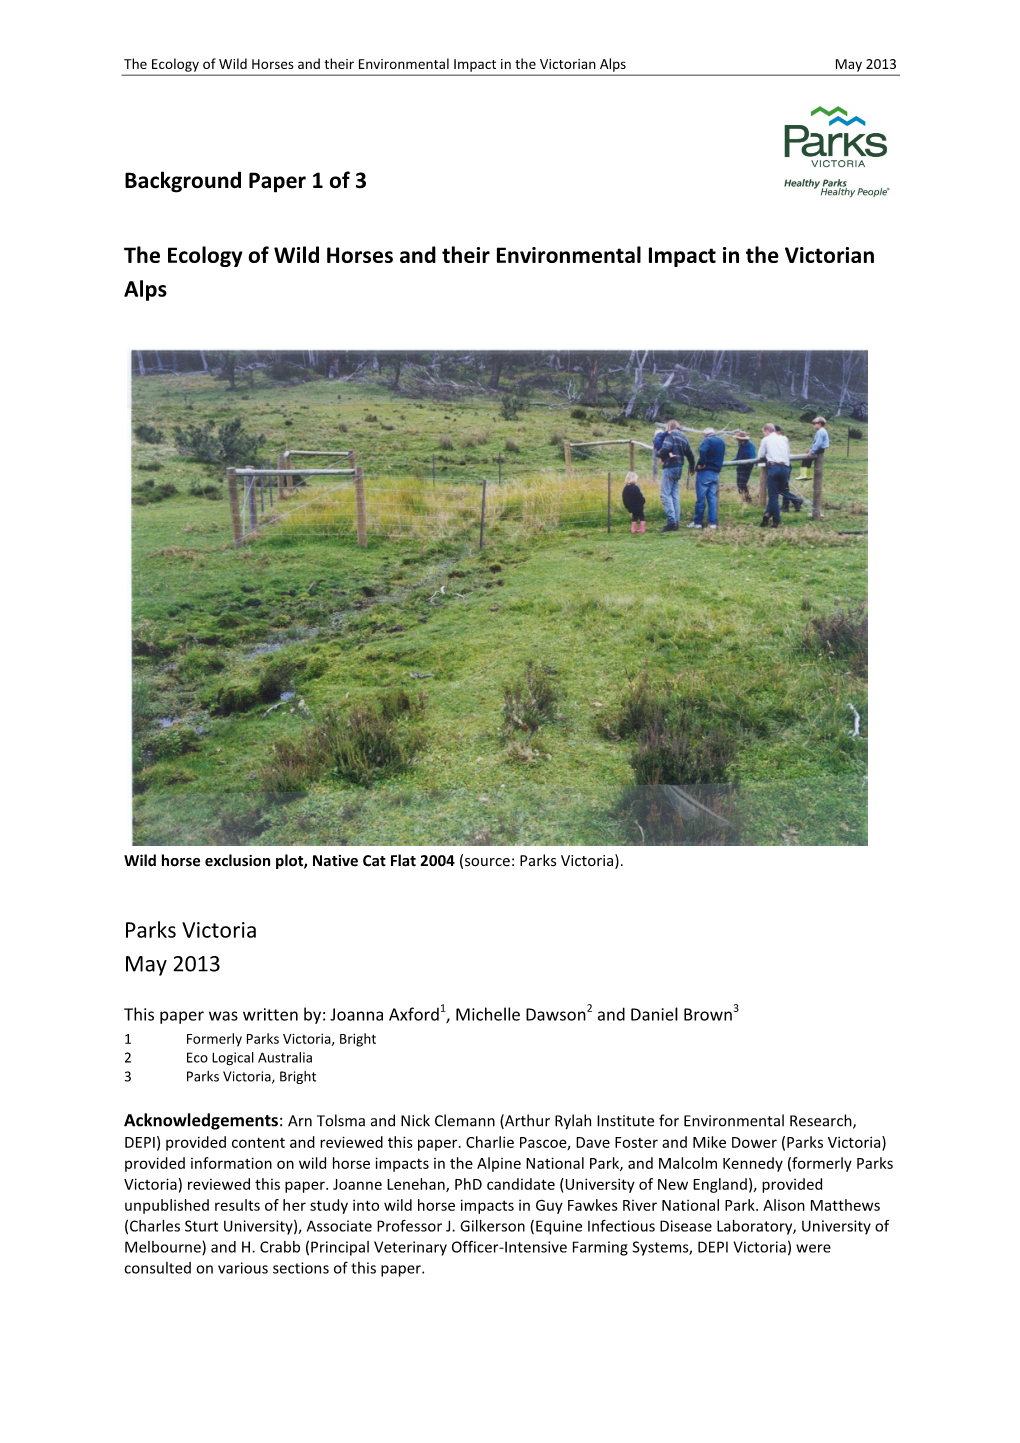 Background Paper 1 of 3 the Ecology of Wild Horses and Their